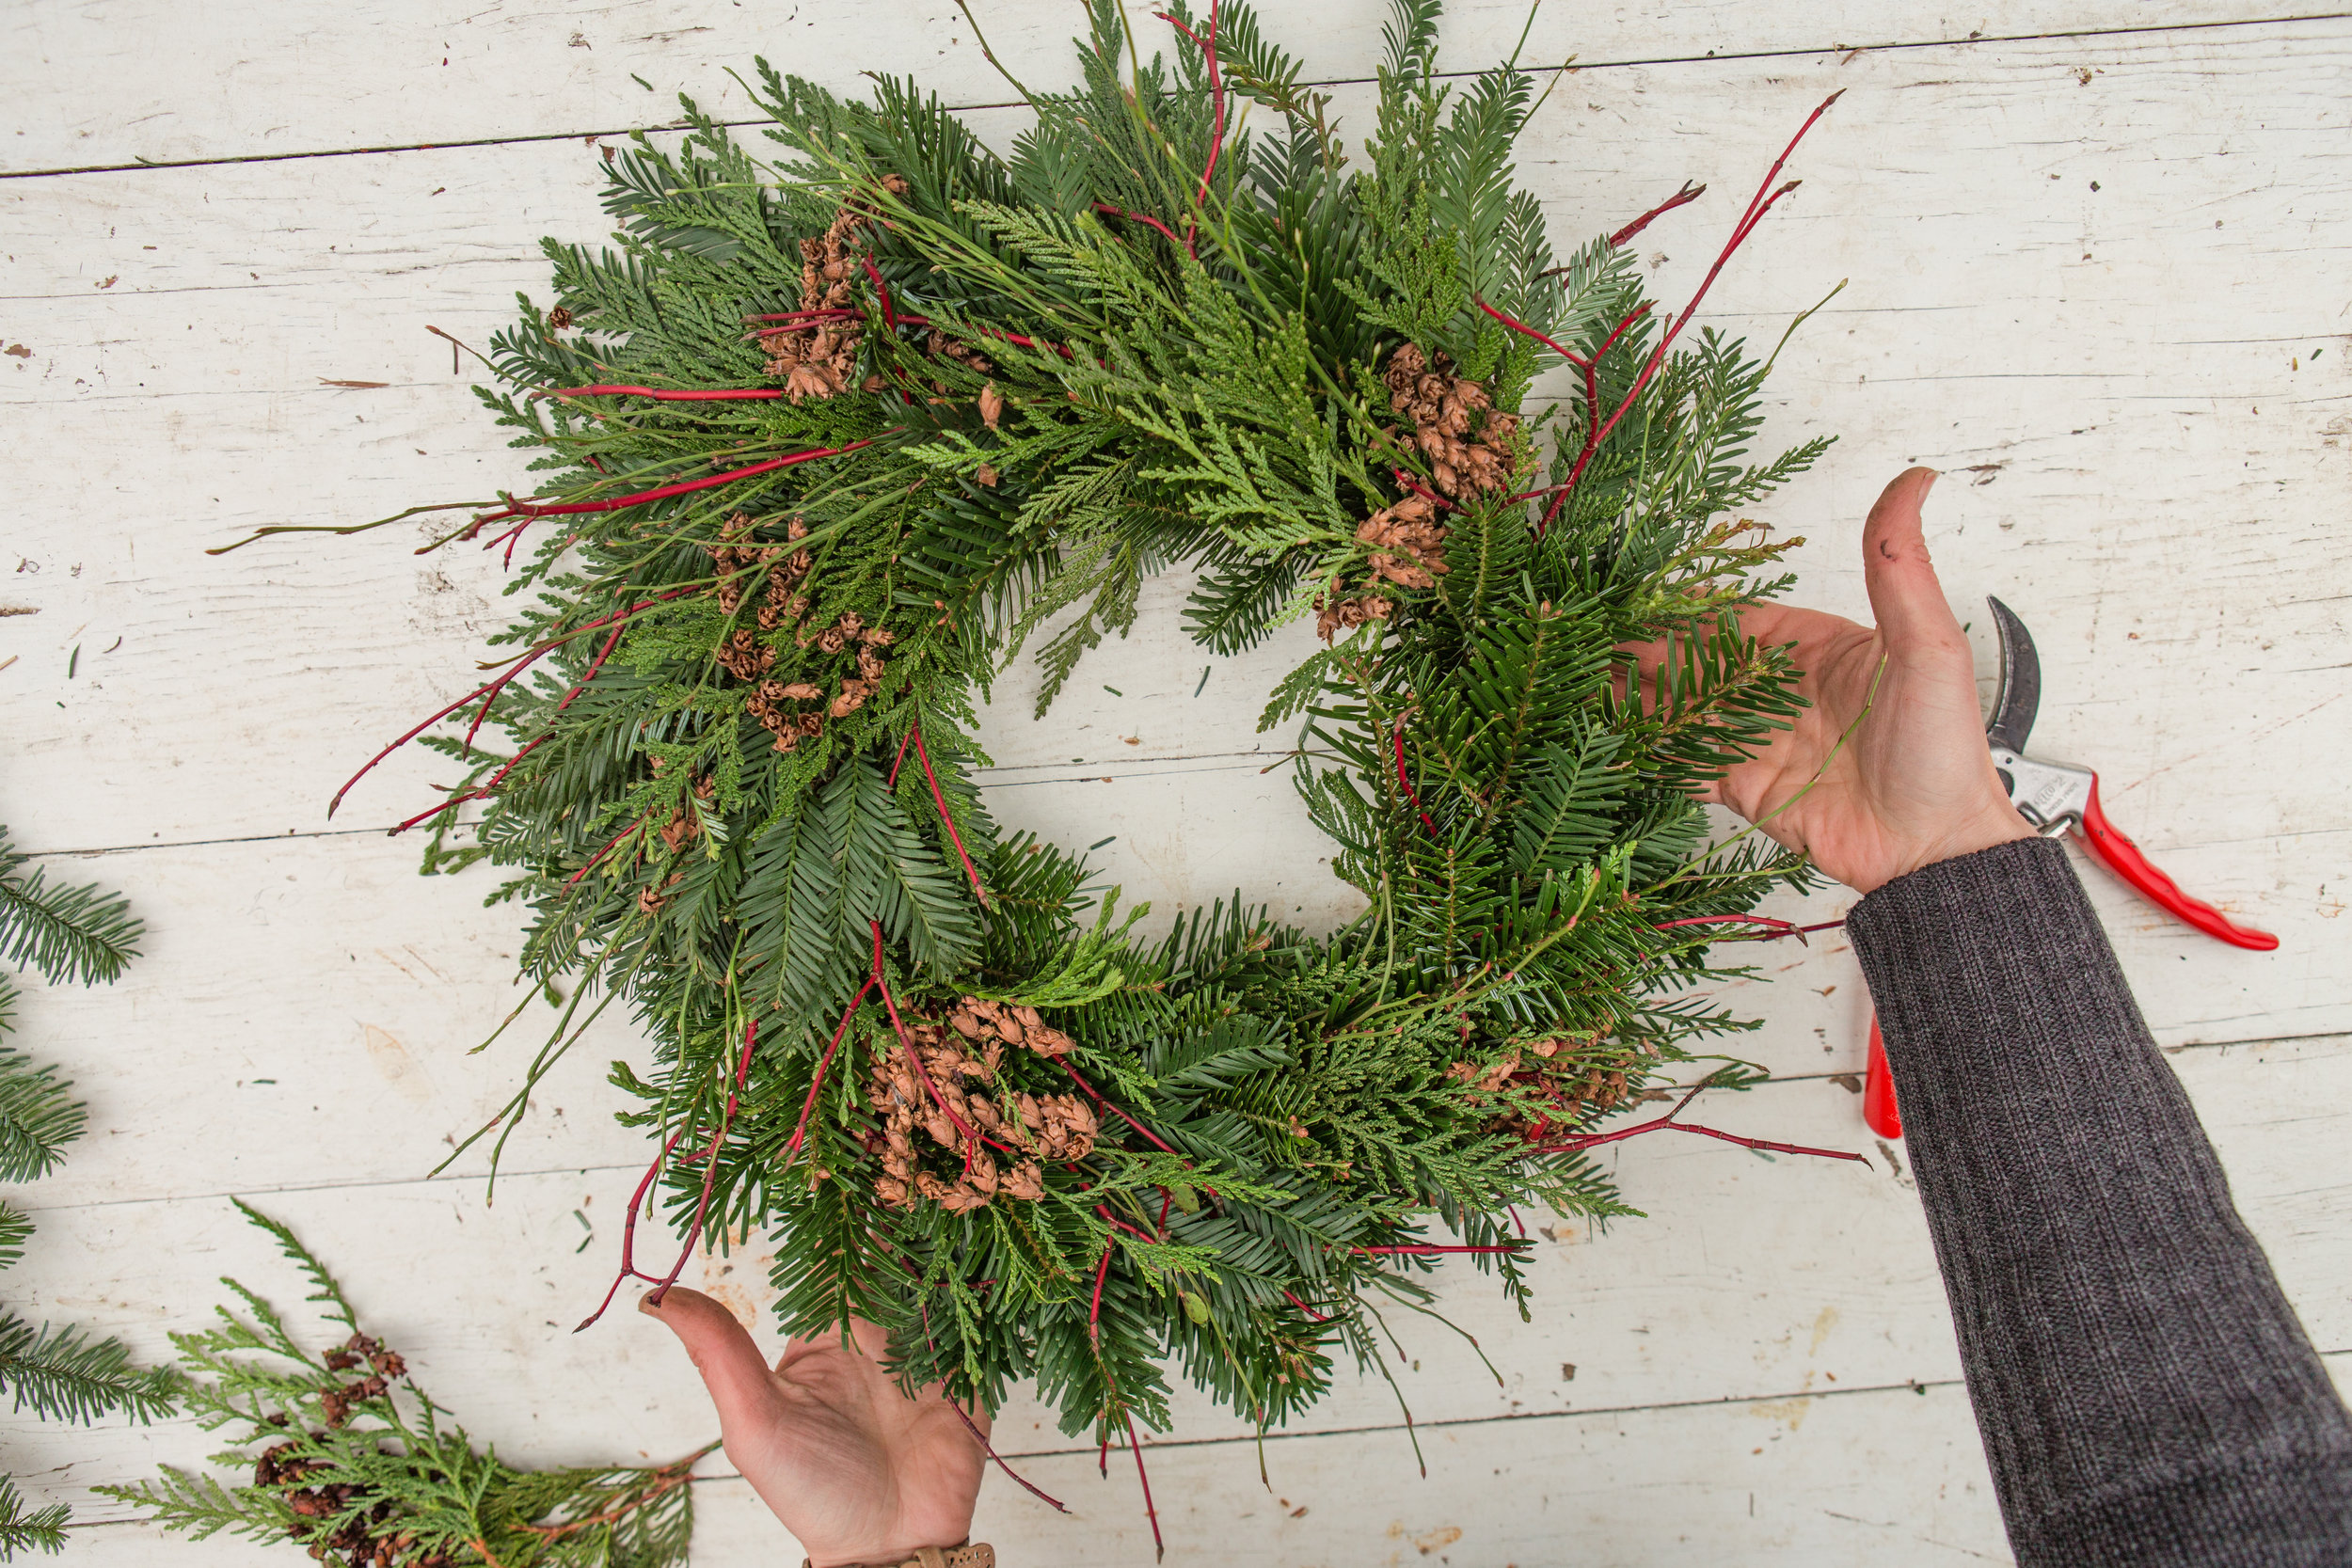 How to Make a Wreath (It's Easier than You Think)